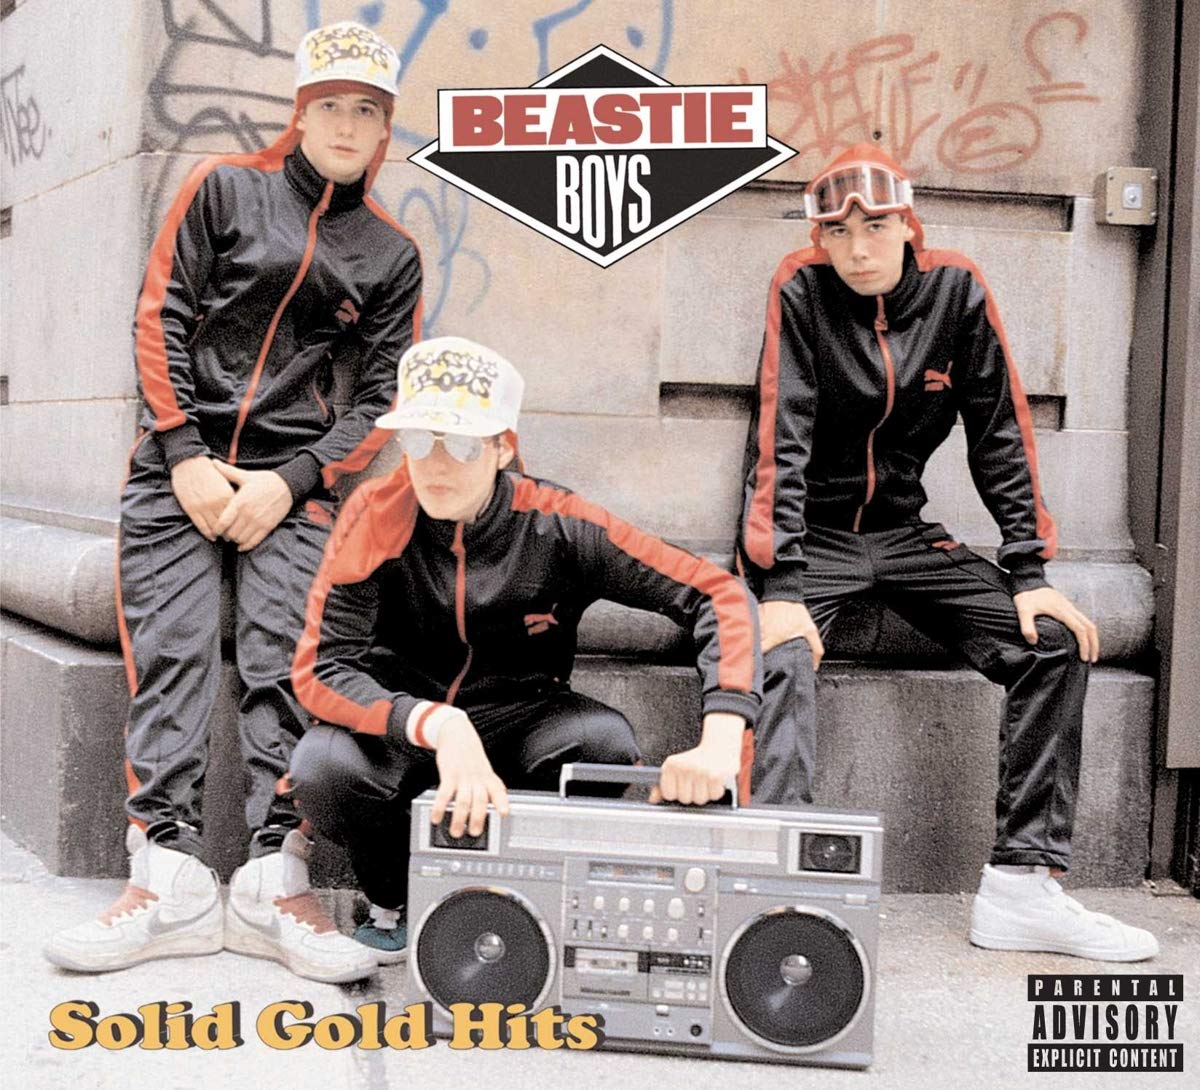 Beastie Boys "Solid Gold Hits" 2LP